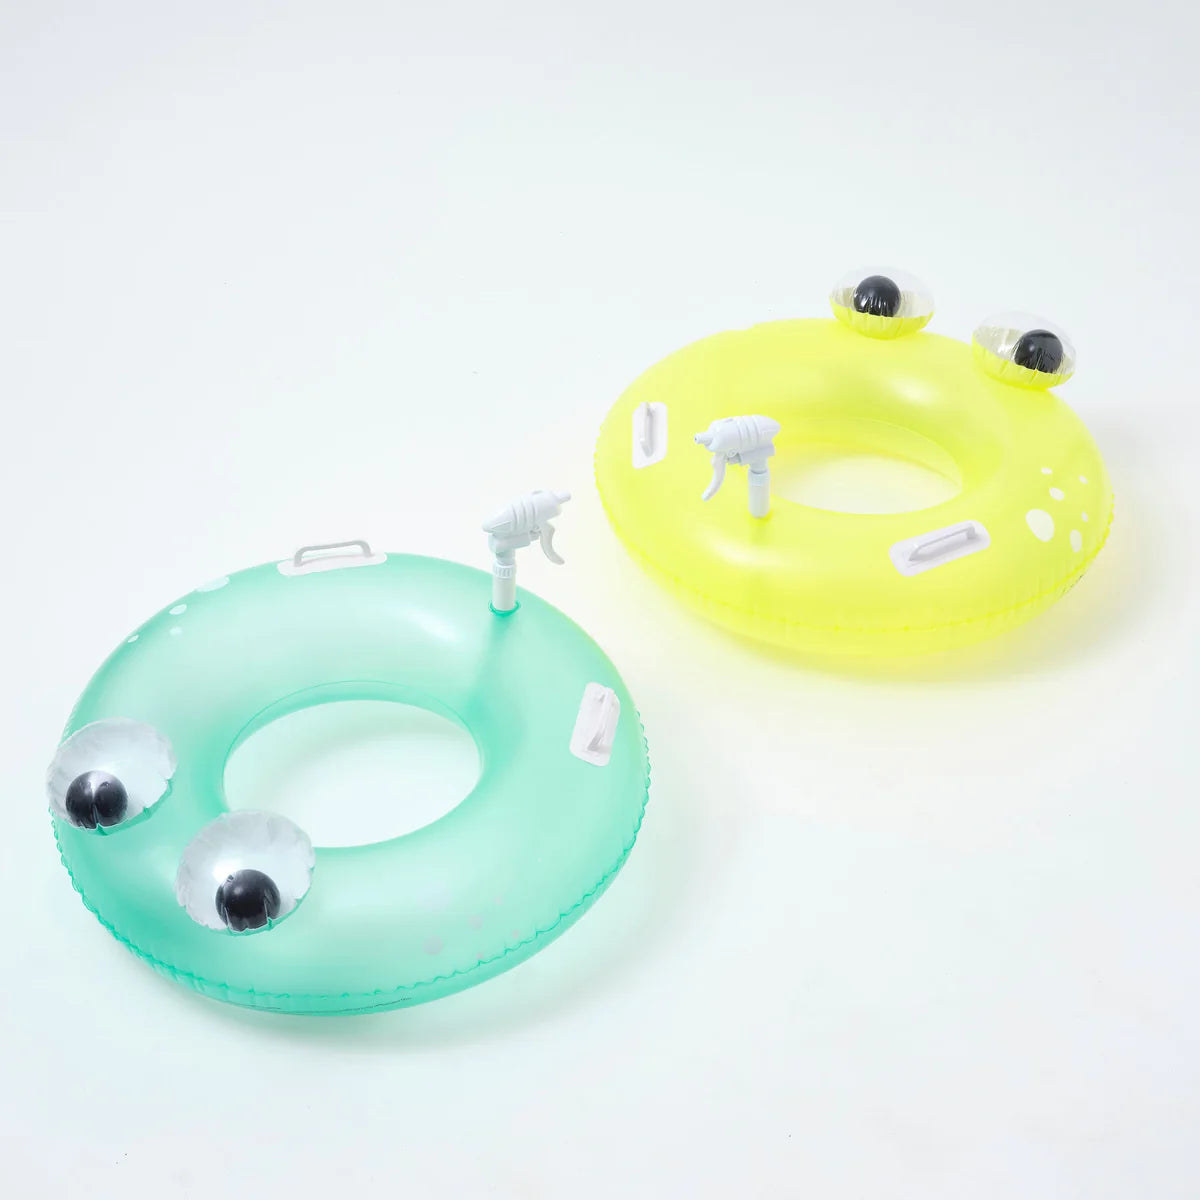 SONNY THE SEA CREATURE POOL RING